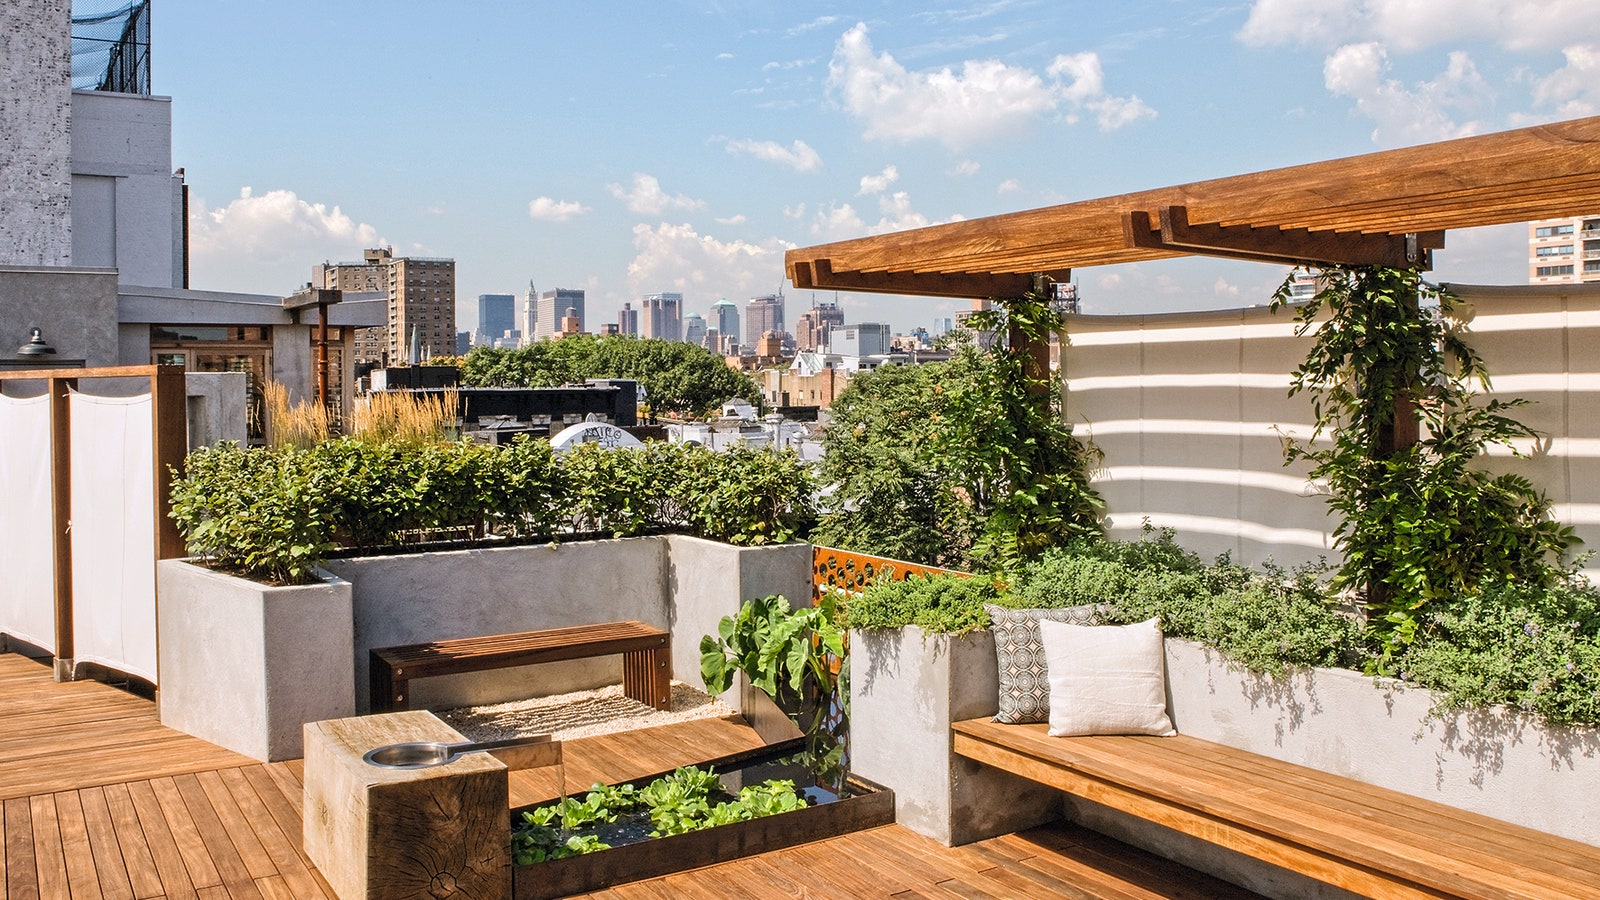 Green Roofs - Outdoor Inspiration For City Dwellers